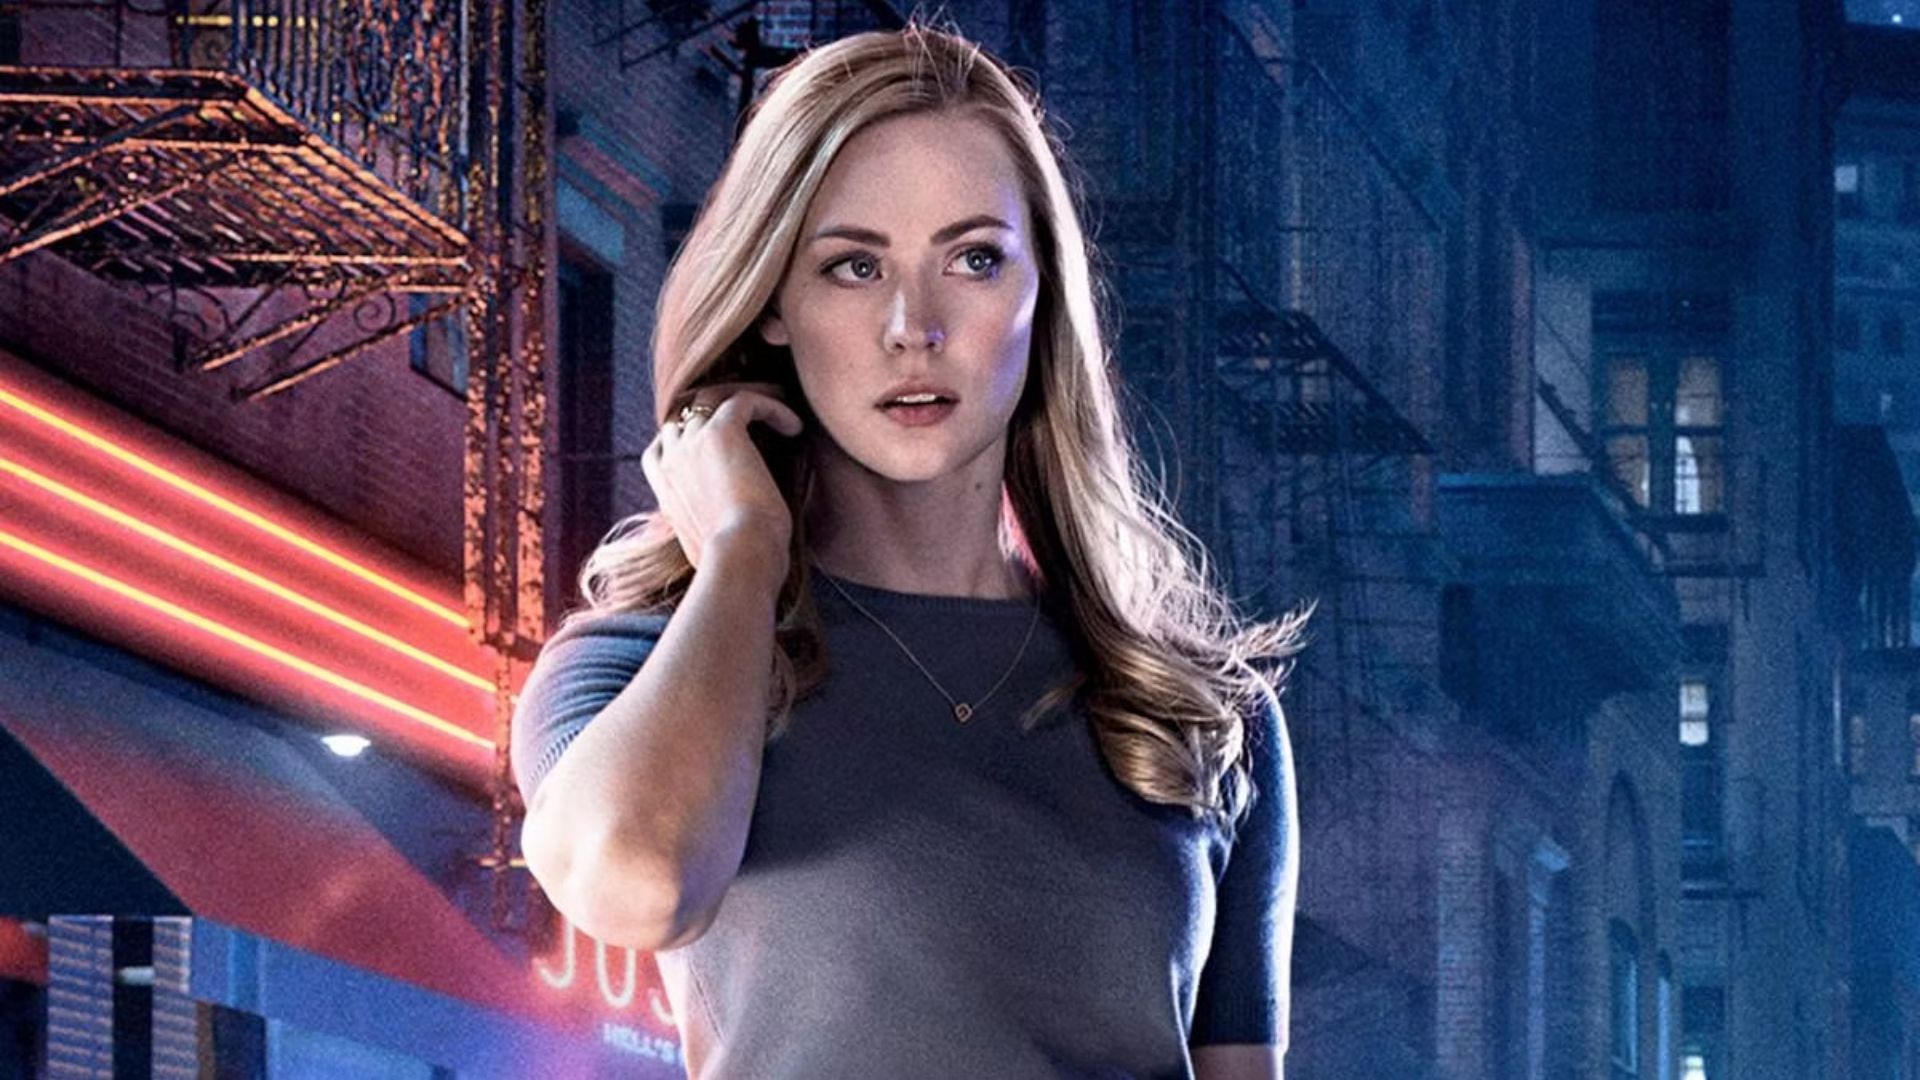 Deborah Ann Woll says she currently has no plans to return as Karen Page (Image via Netflix/Marvel)